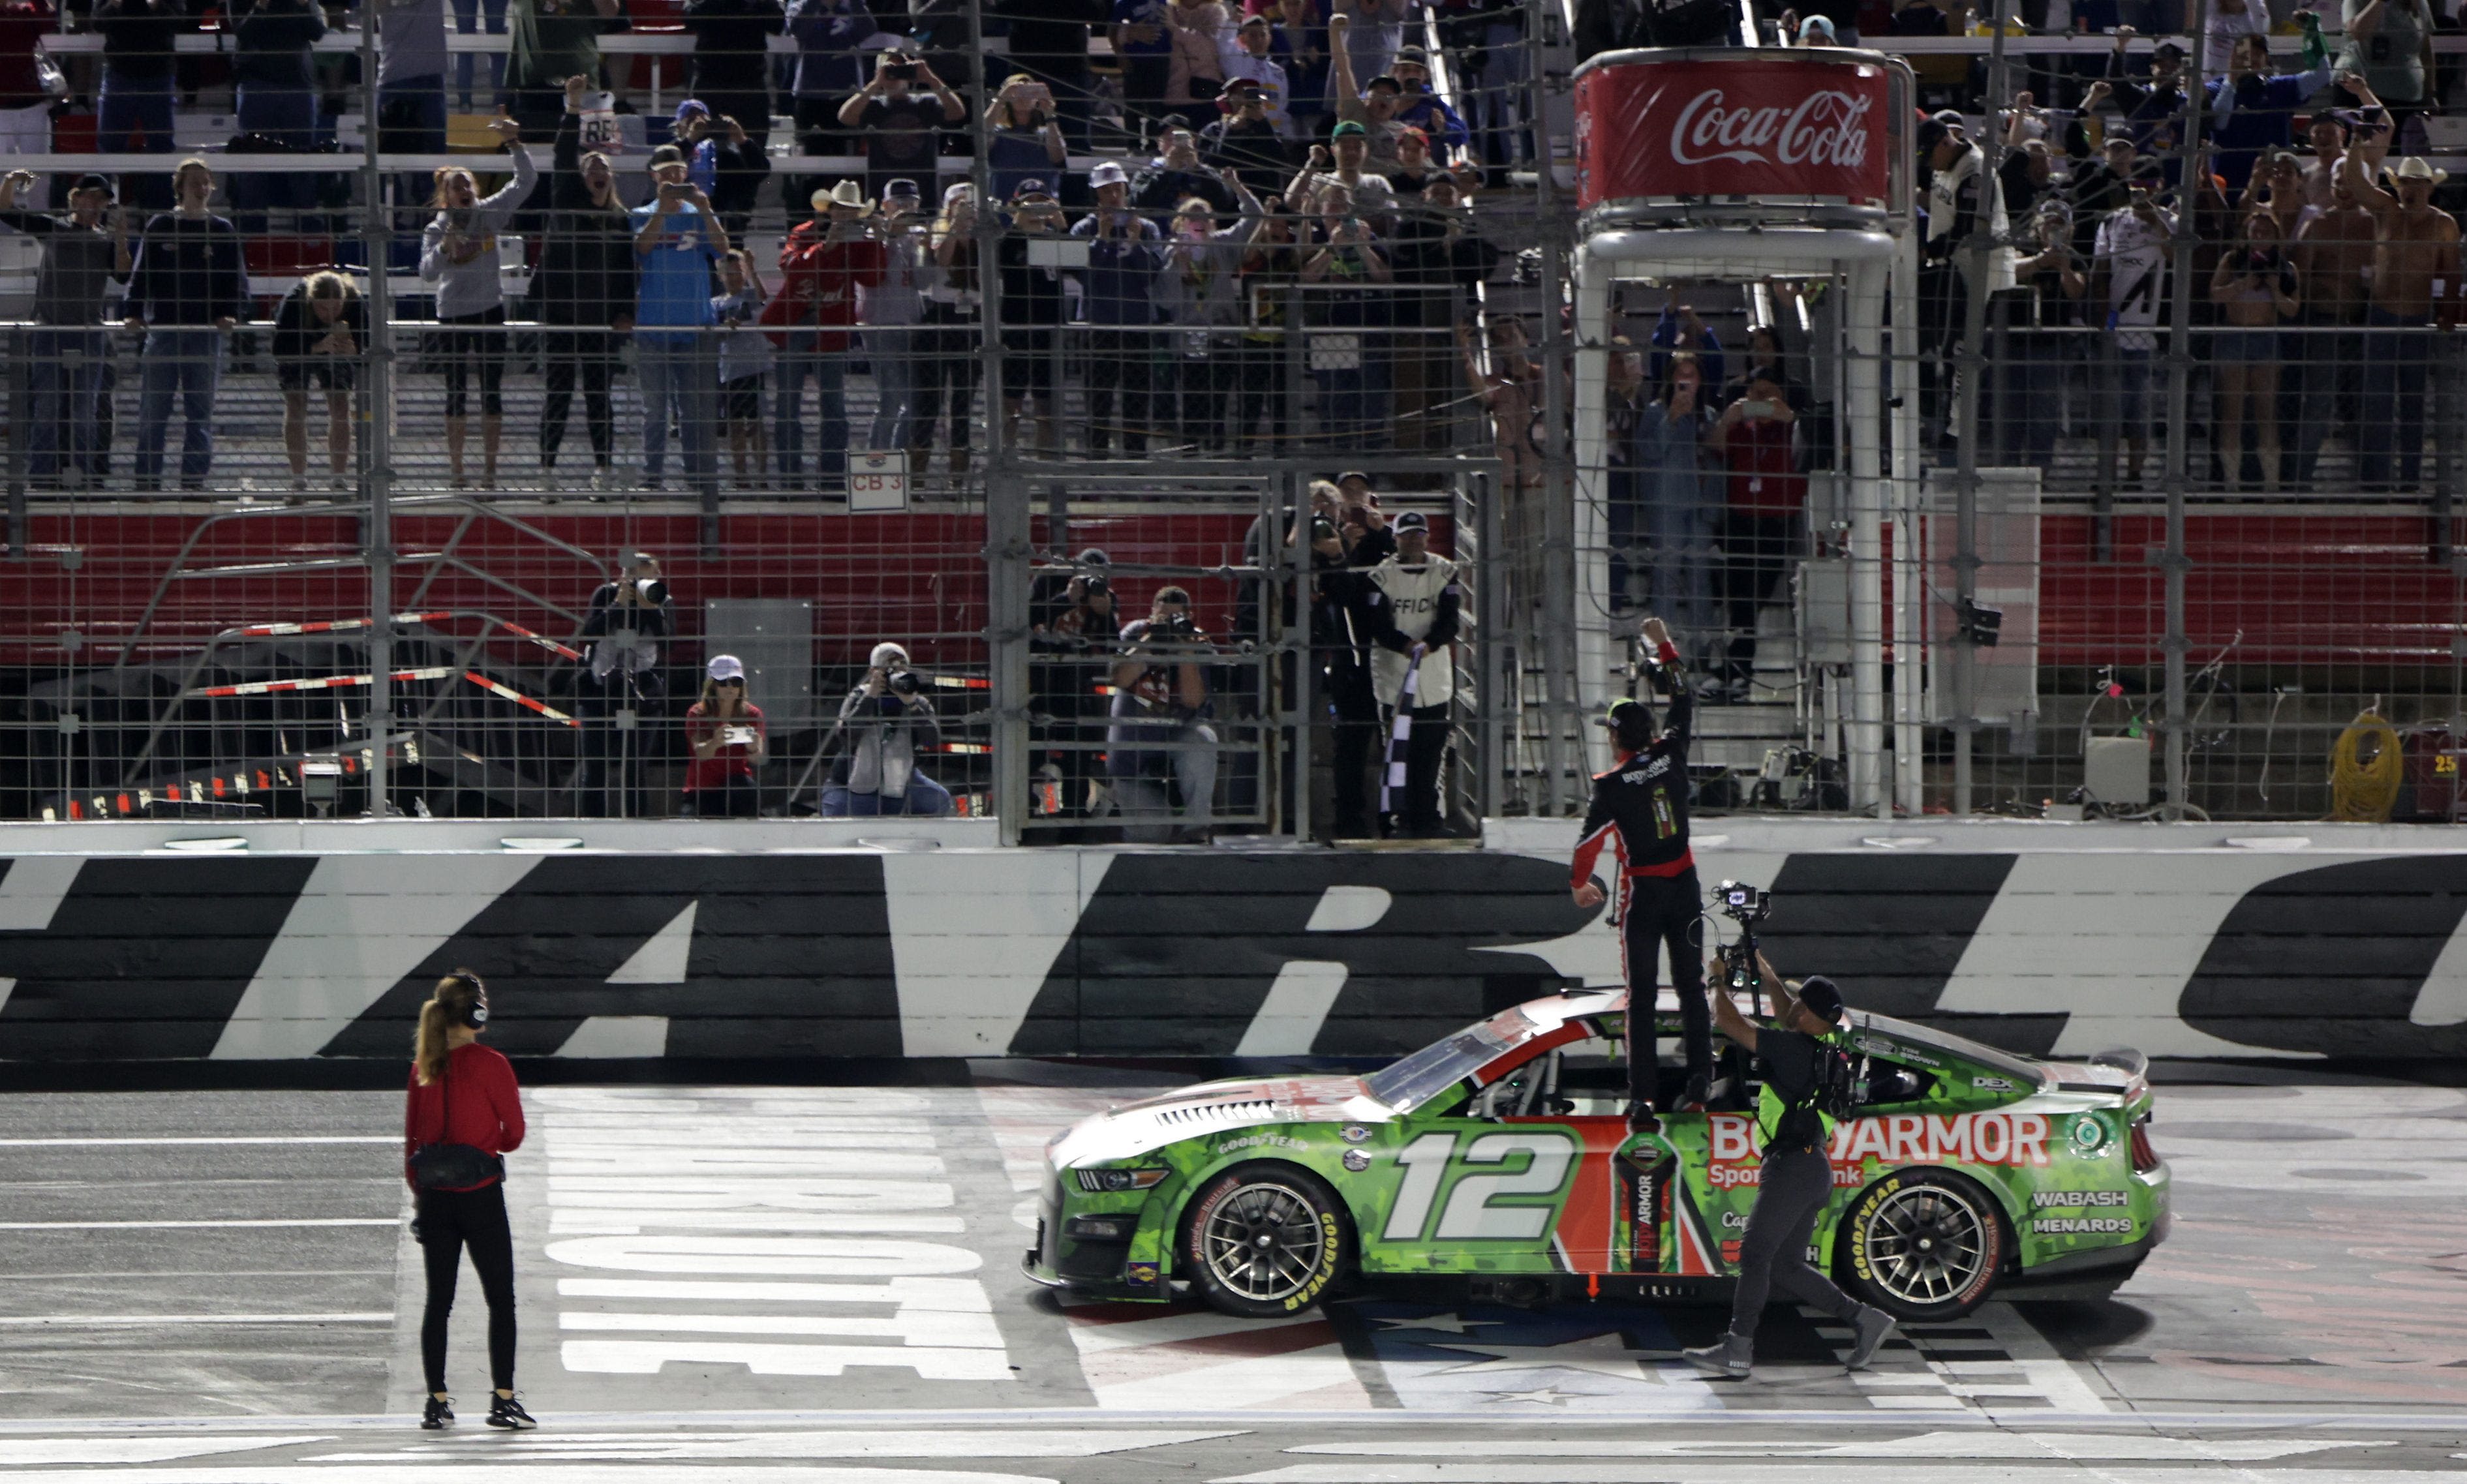 NASCAR best bets include a free-money top 5 and a long look at team, manufacturer odds at Charlotte